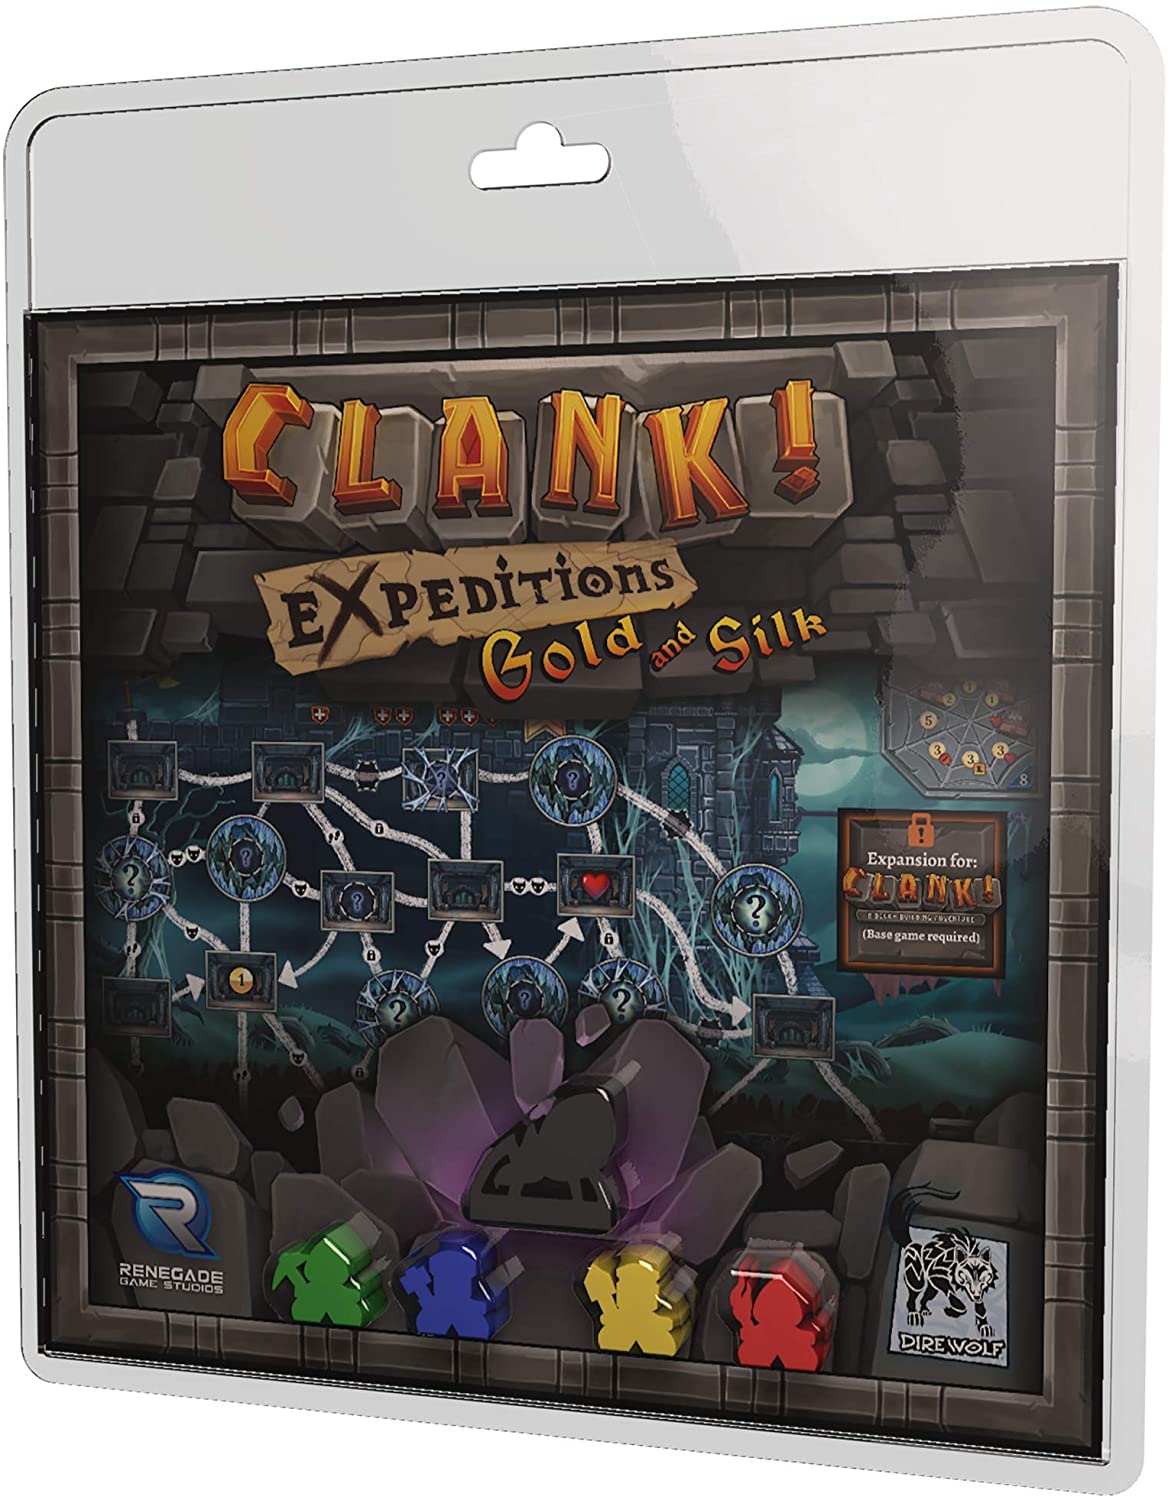 Clank!: Expeditions - Gold and Silk expansion